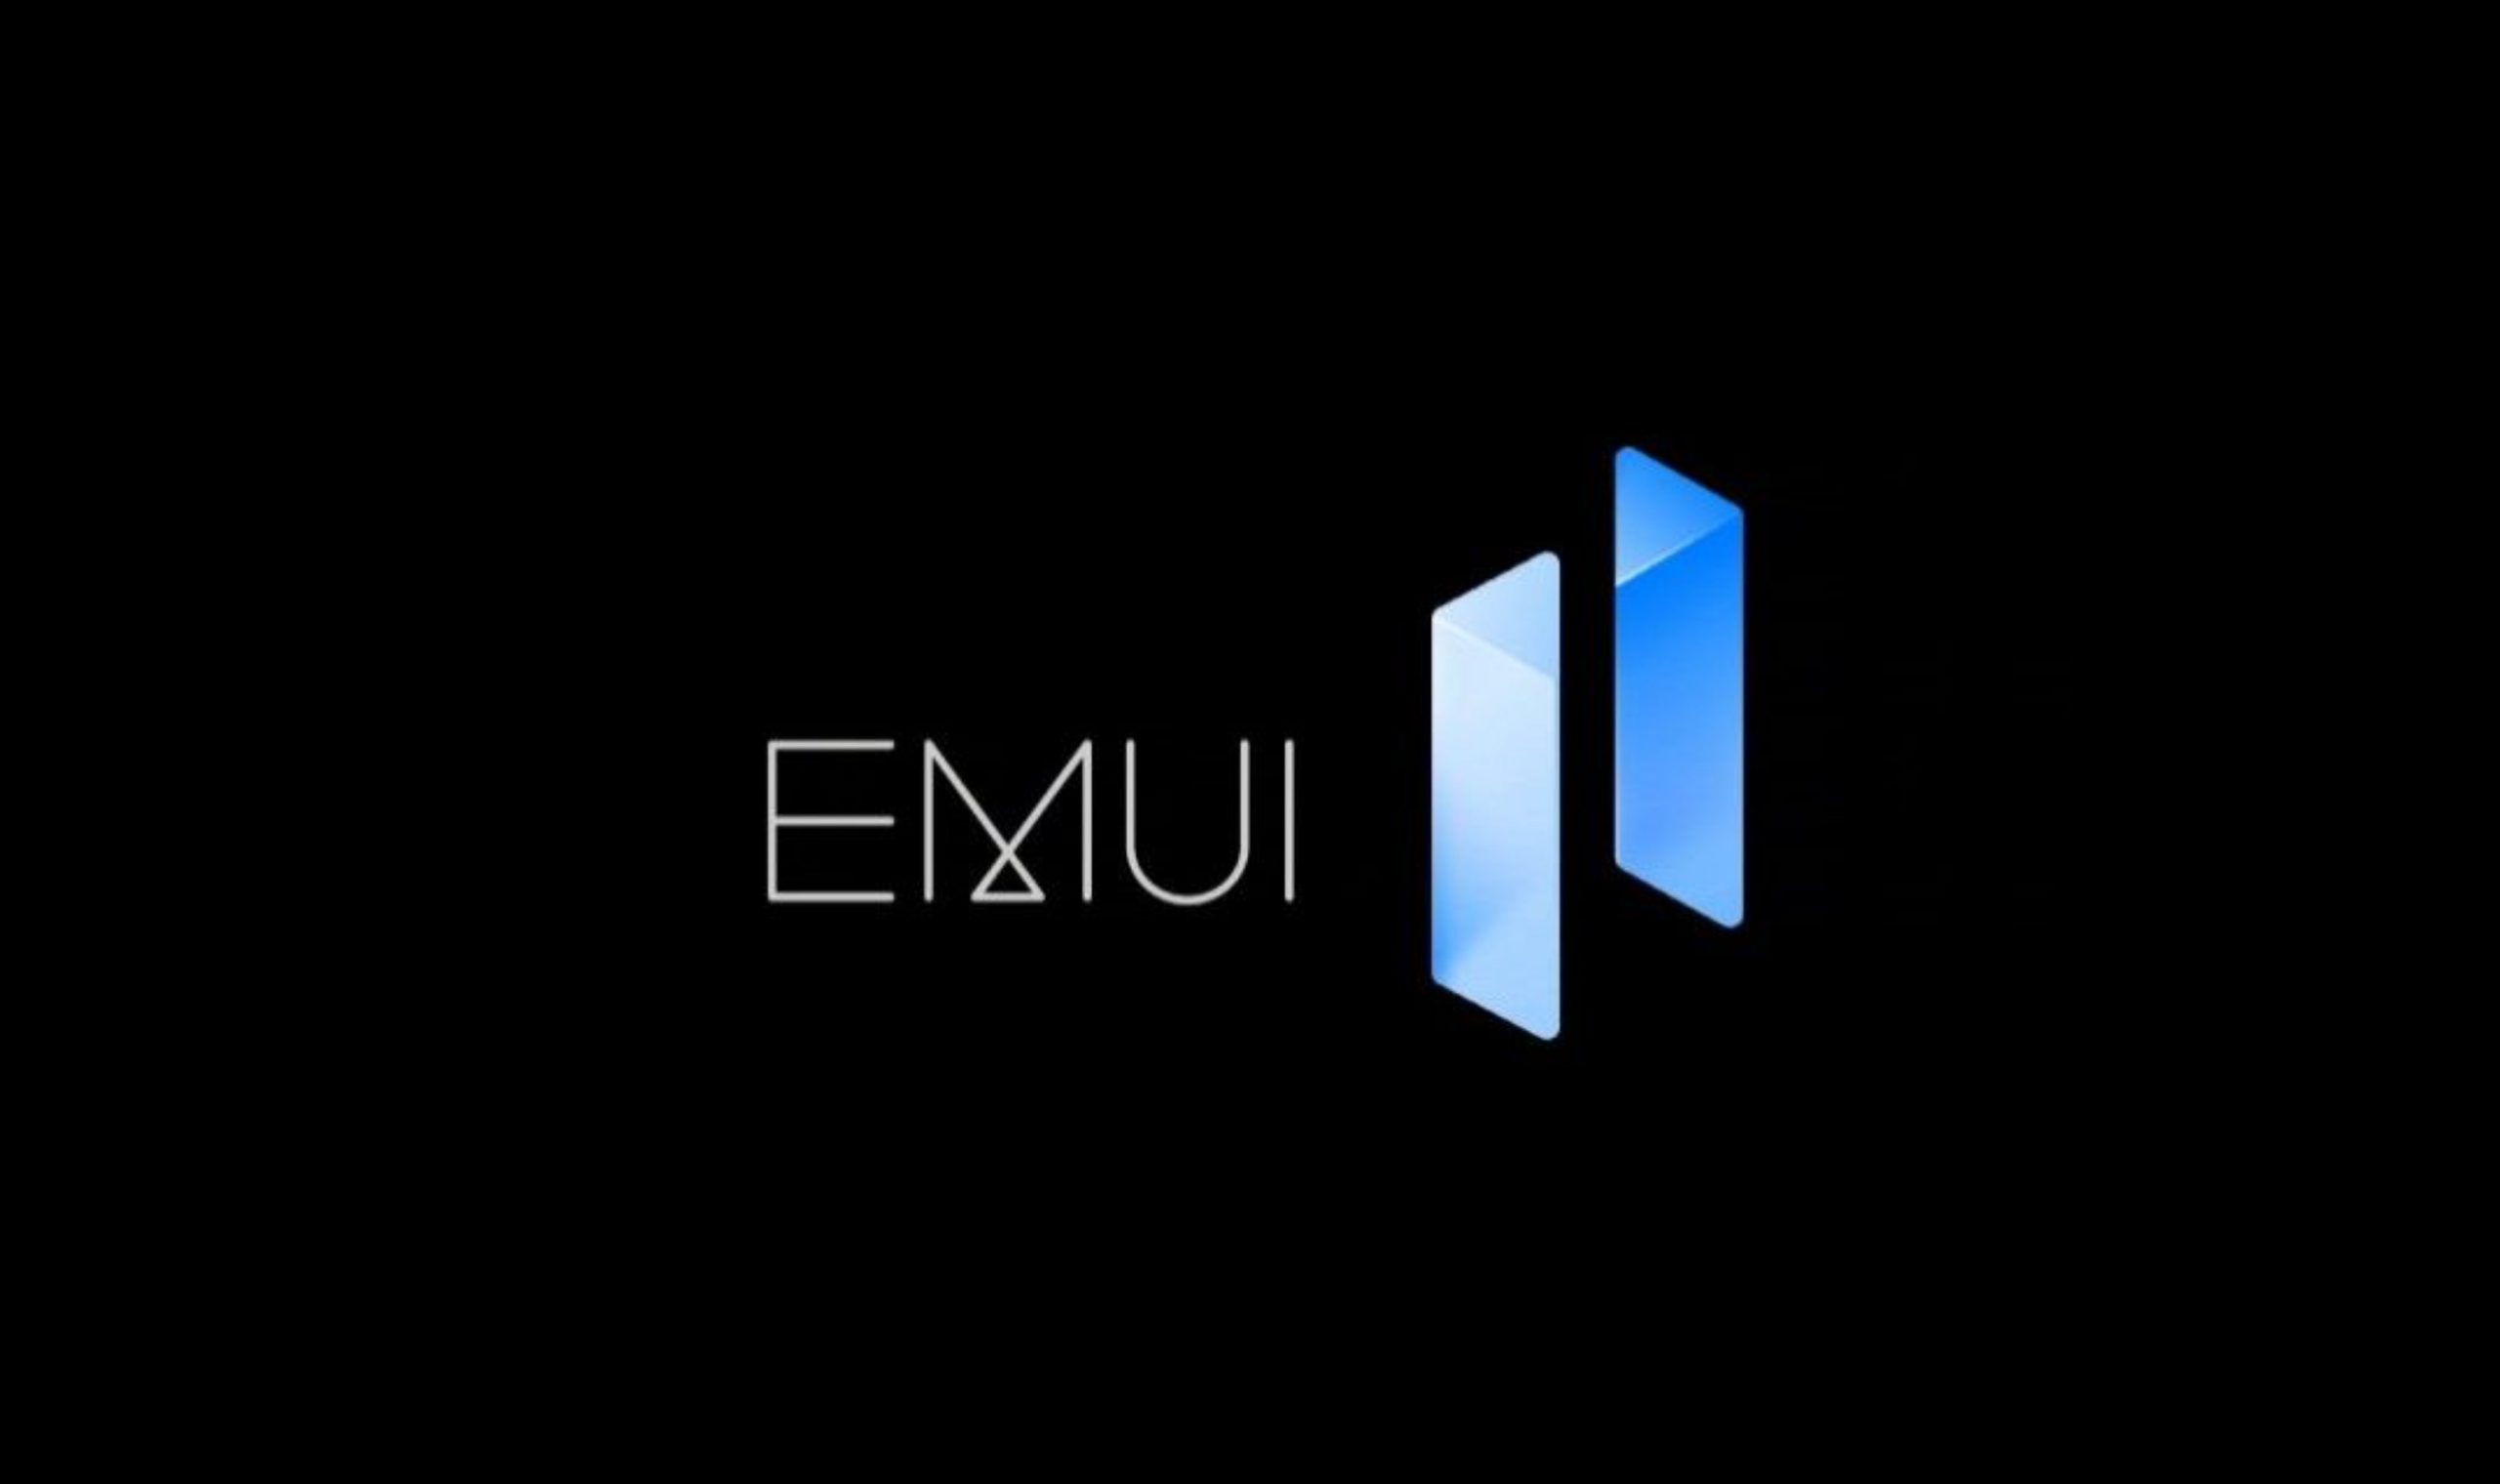 EMUI 11 also has an ‘Earthquake Warning’ feature just like MIUI